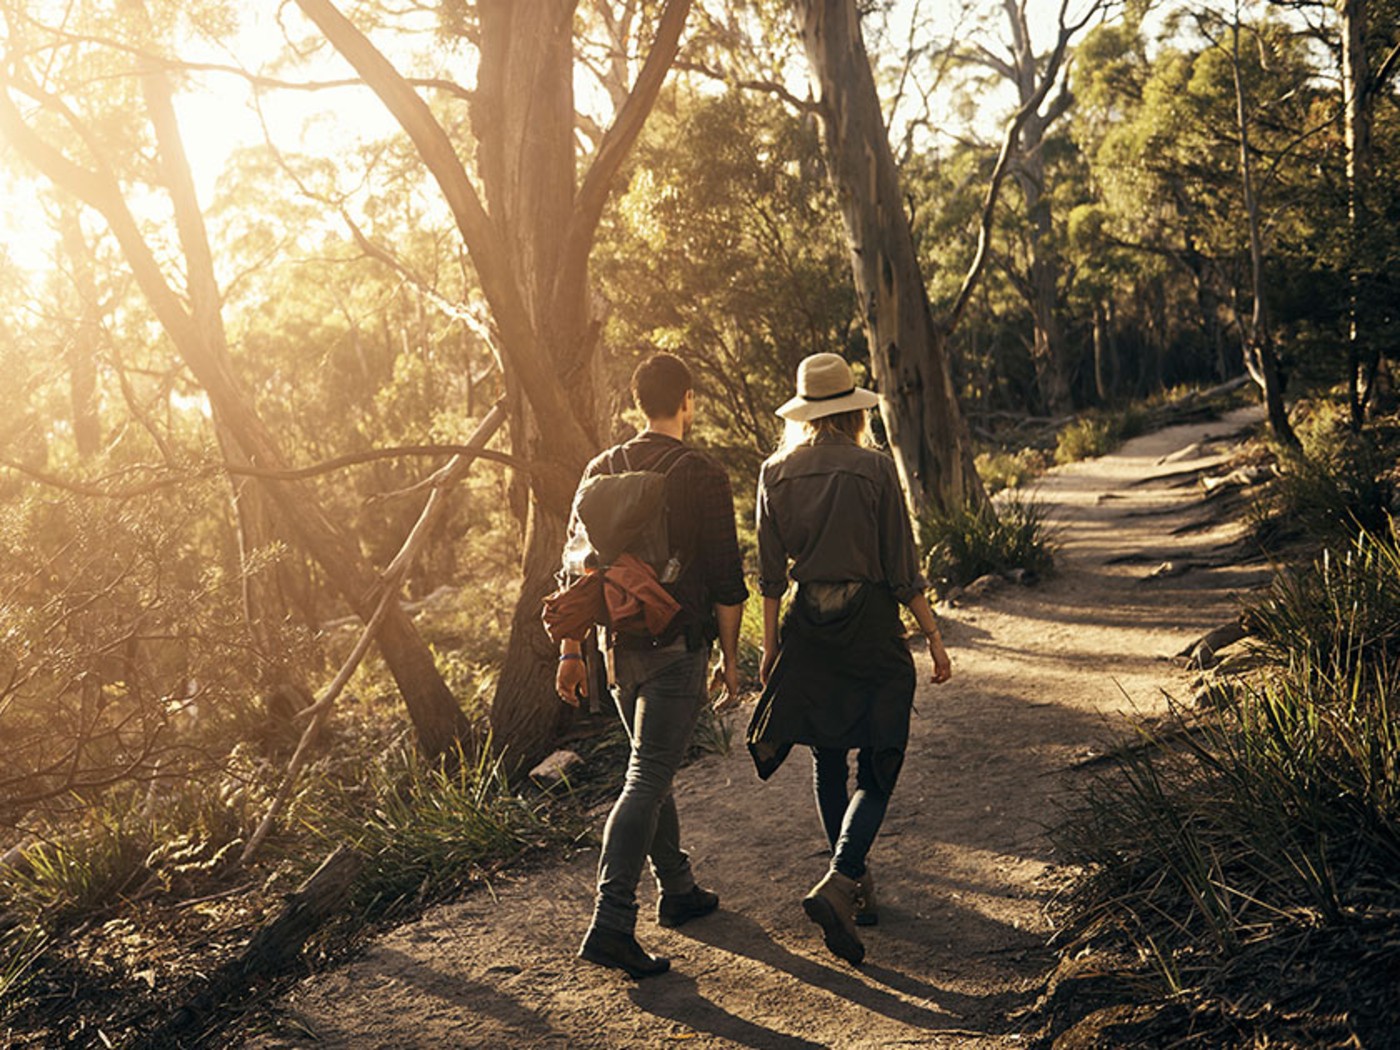 https://tickertapecdn.tdameritrade.com/assets/images/pages/md/People hiking in forest: Retirement planning